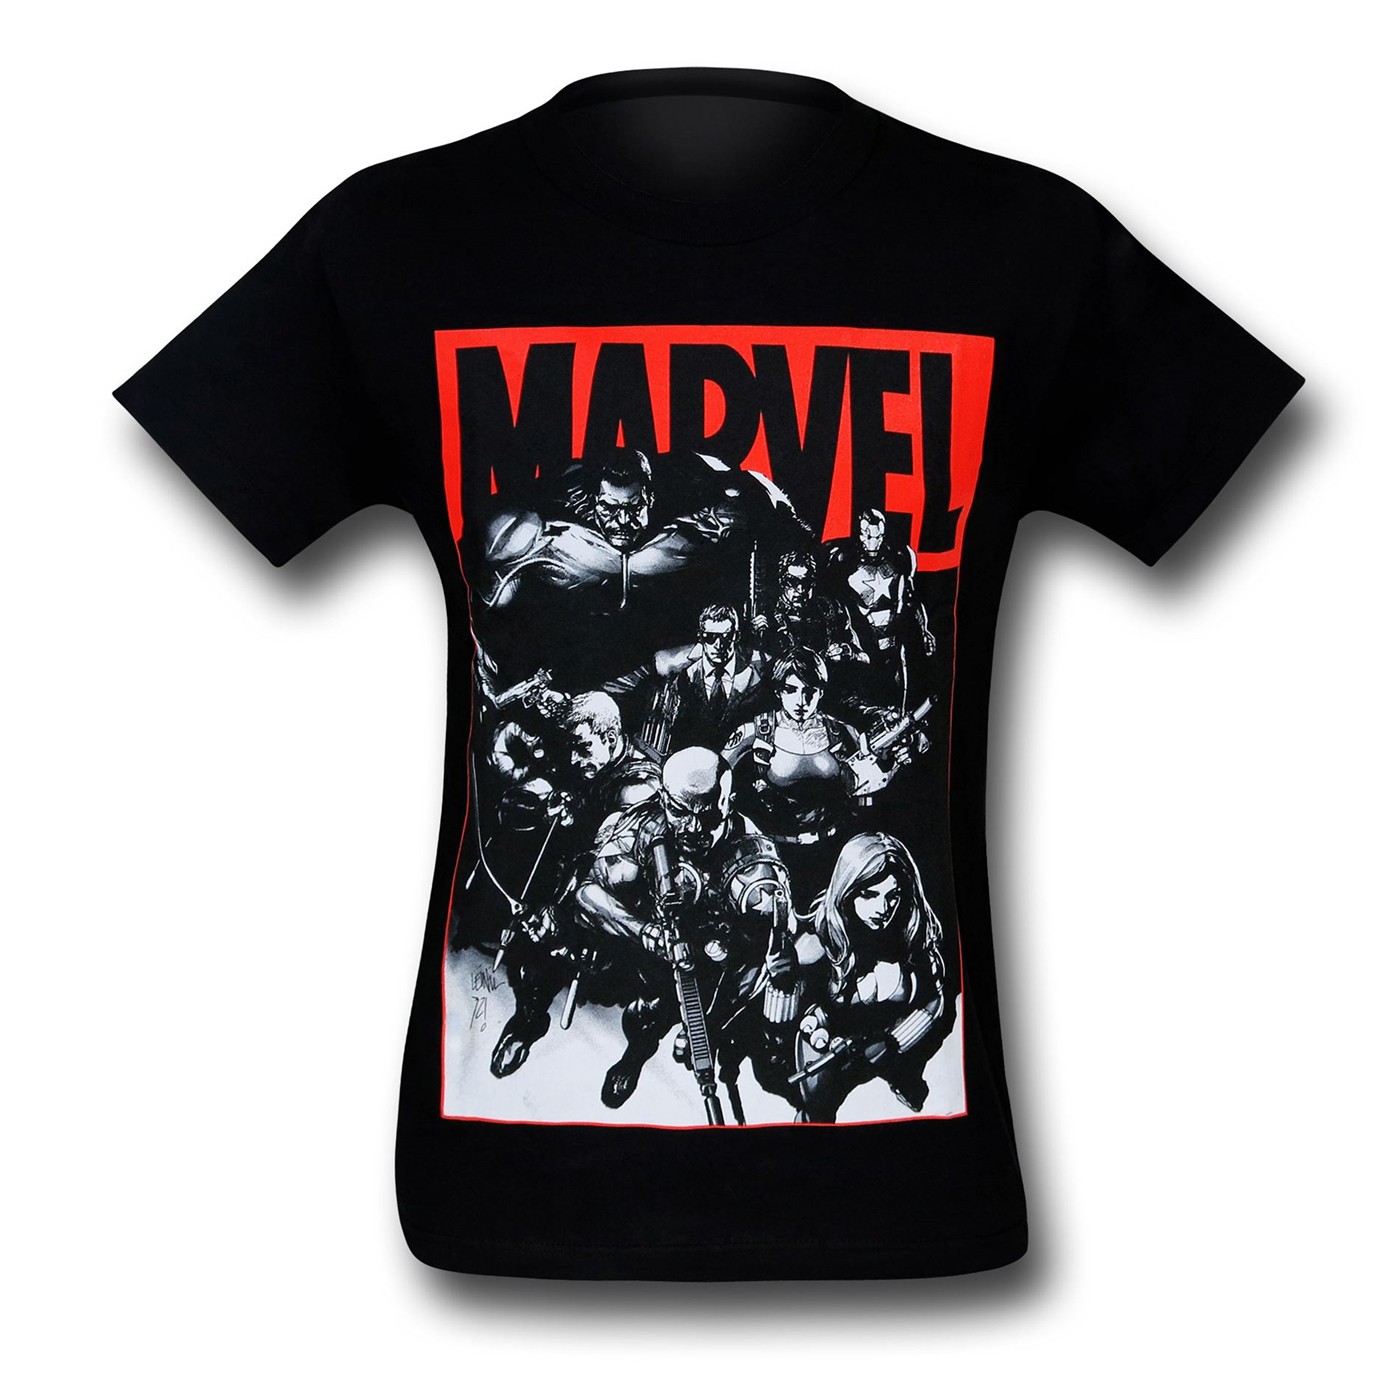 Marvel Armed Heroes and Logo Black T-Shirt